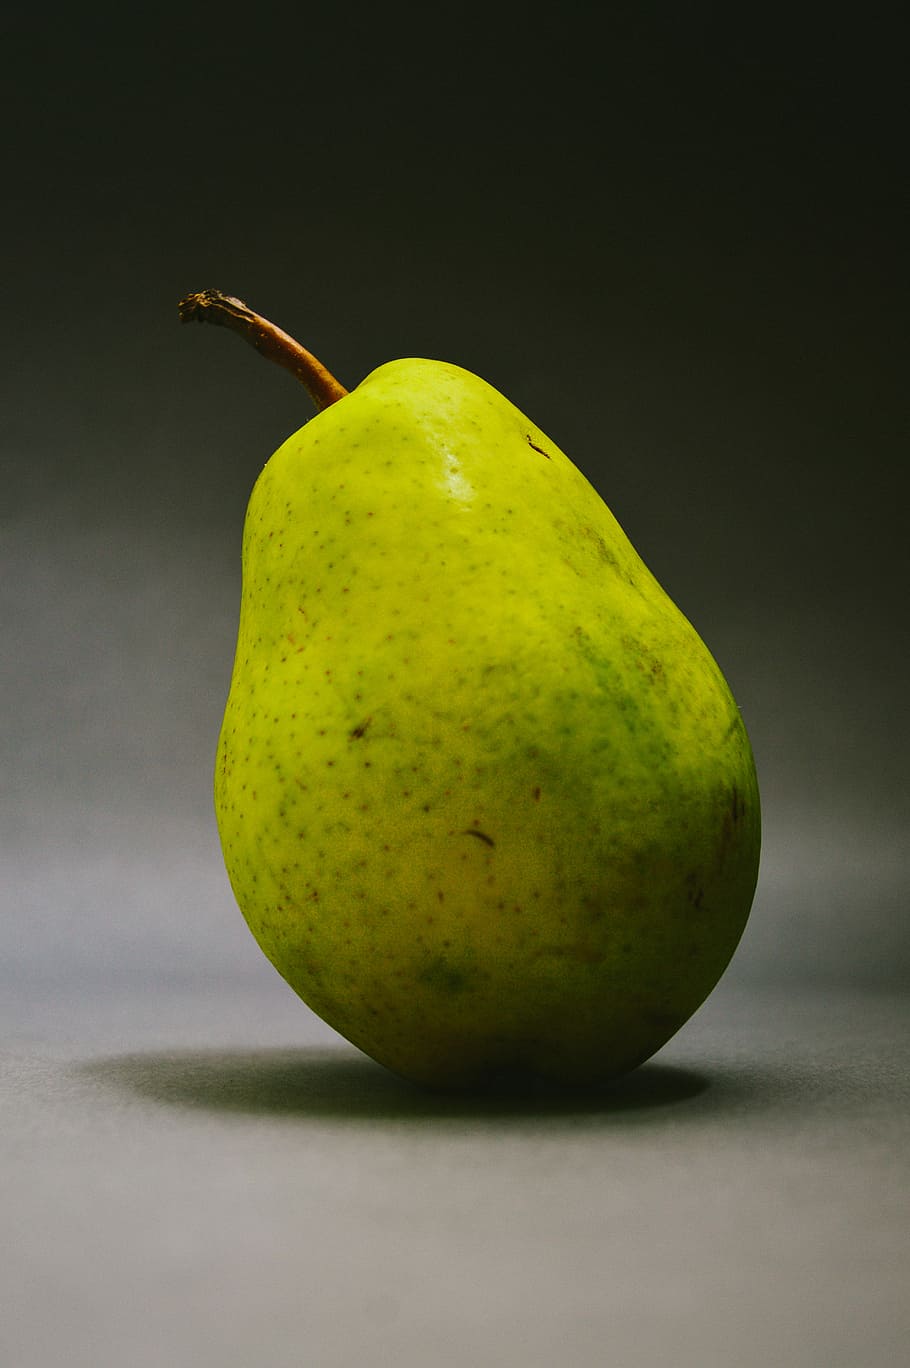 lonely pear, Lonely, pear, close up, dark, fruit, green, healthy, food, freshness